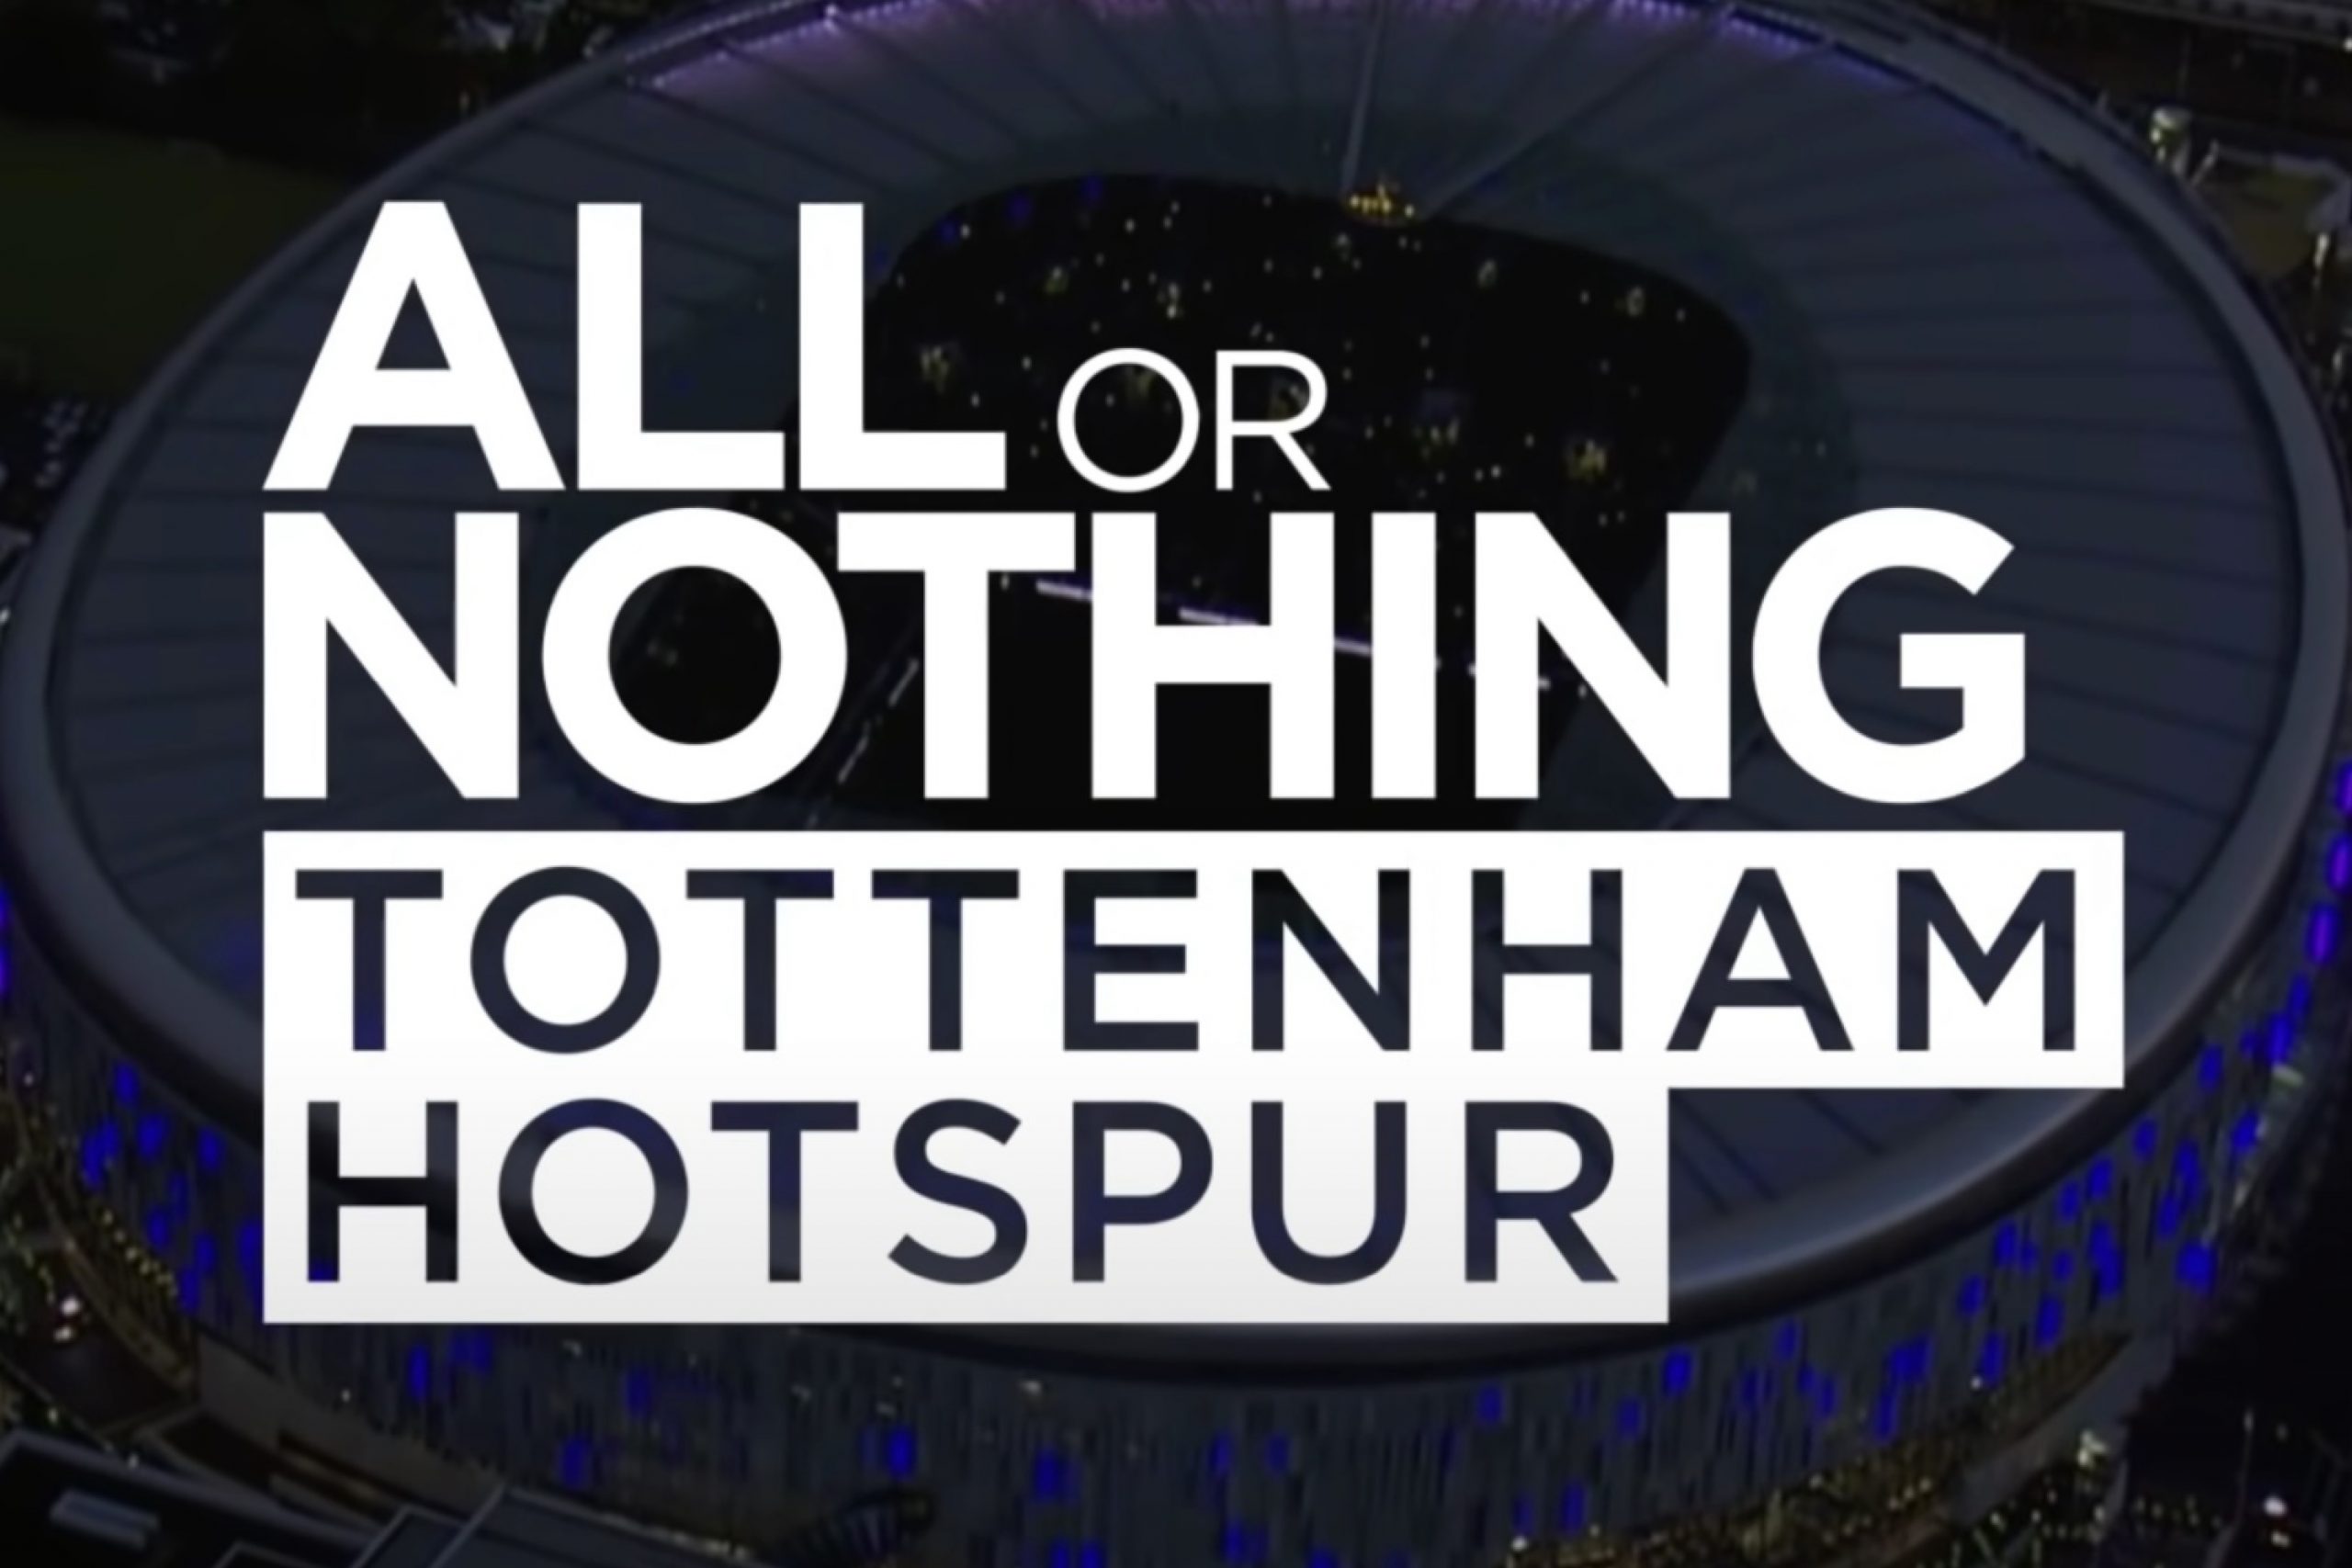 Amazon drops brand new trailer for Tottenham’s ‘All or Nothing’ docuseries